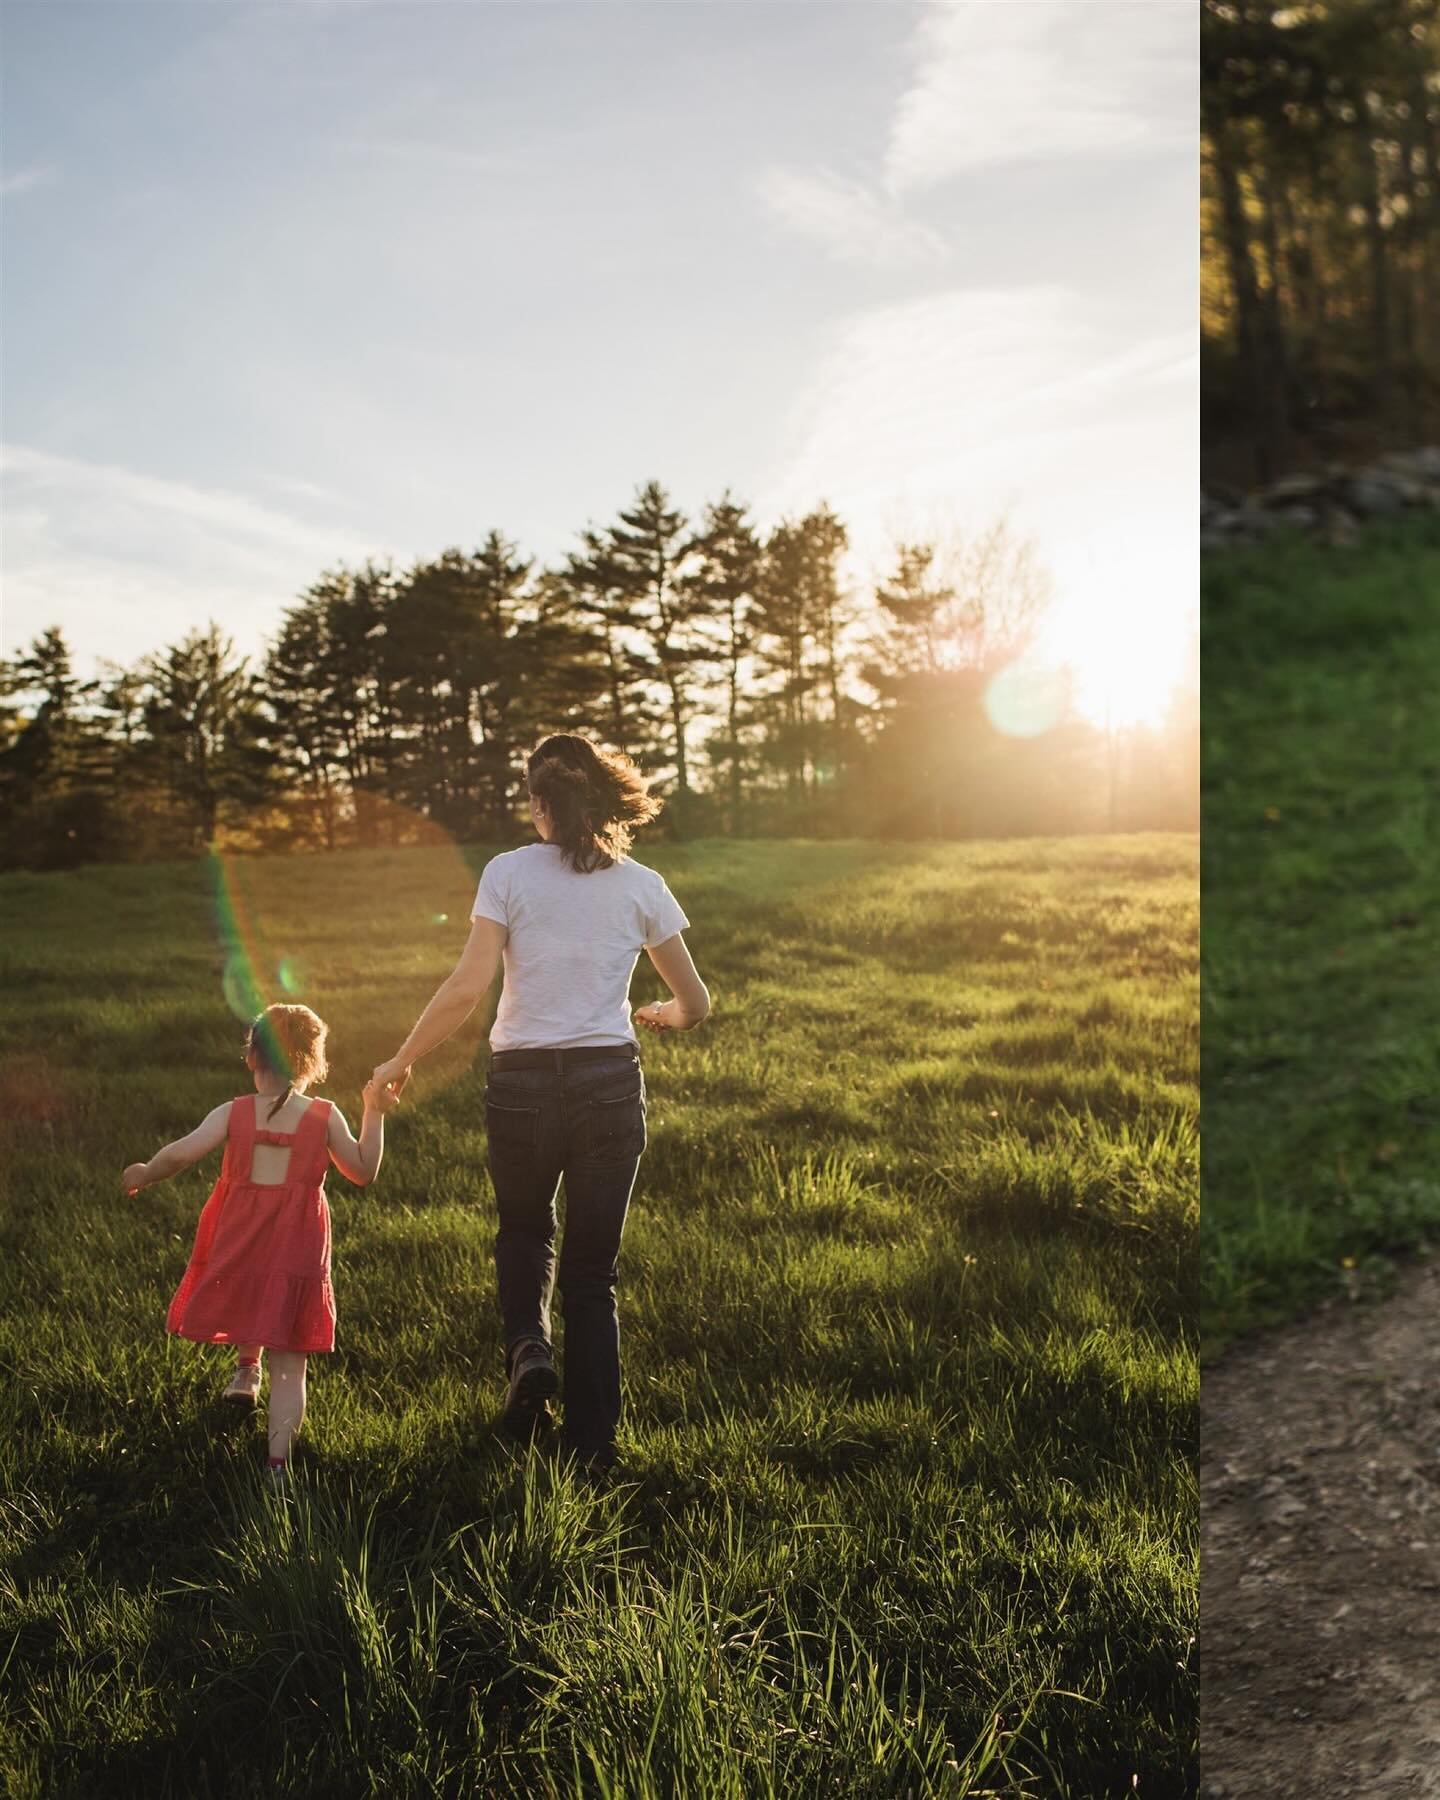 Exploring a meaningful place makes for very special photos. What a beautiful session in New Hampshire with some of my amazing returning clients. 💛

#emilylordphoto #family #familyadventures #farm #newhampshire #spring #outside #specialplaces